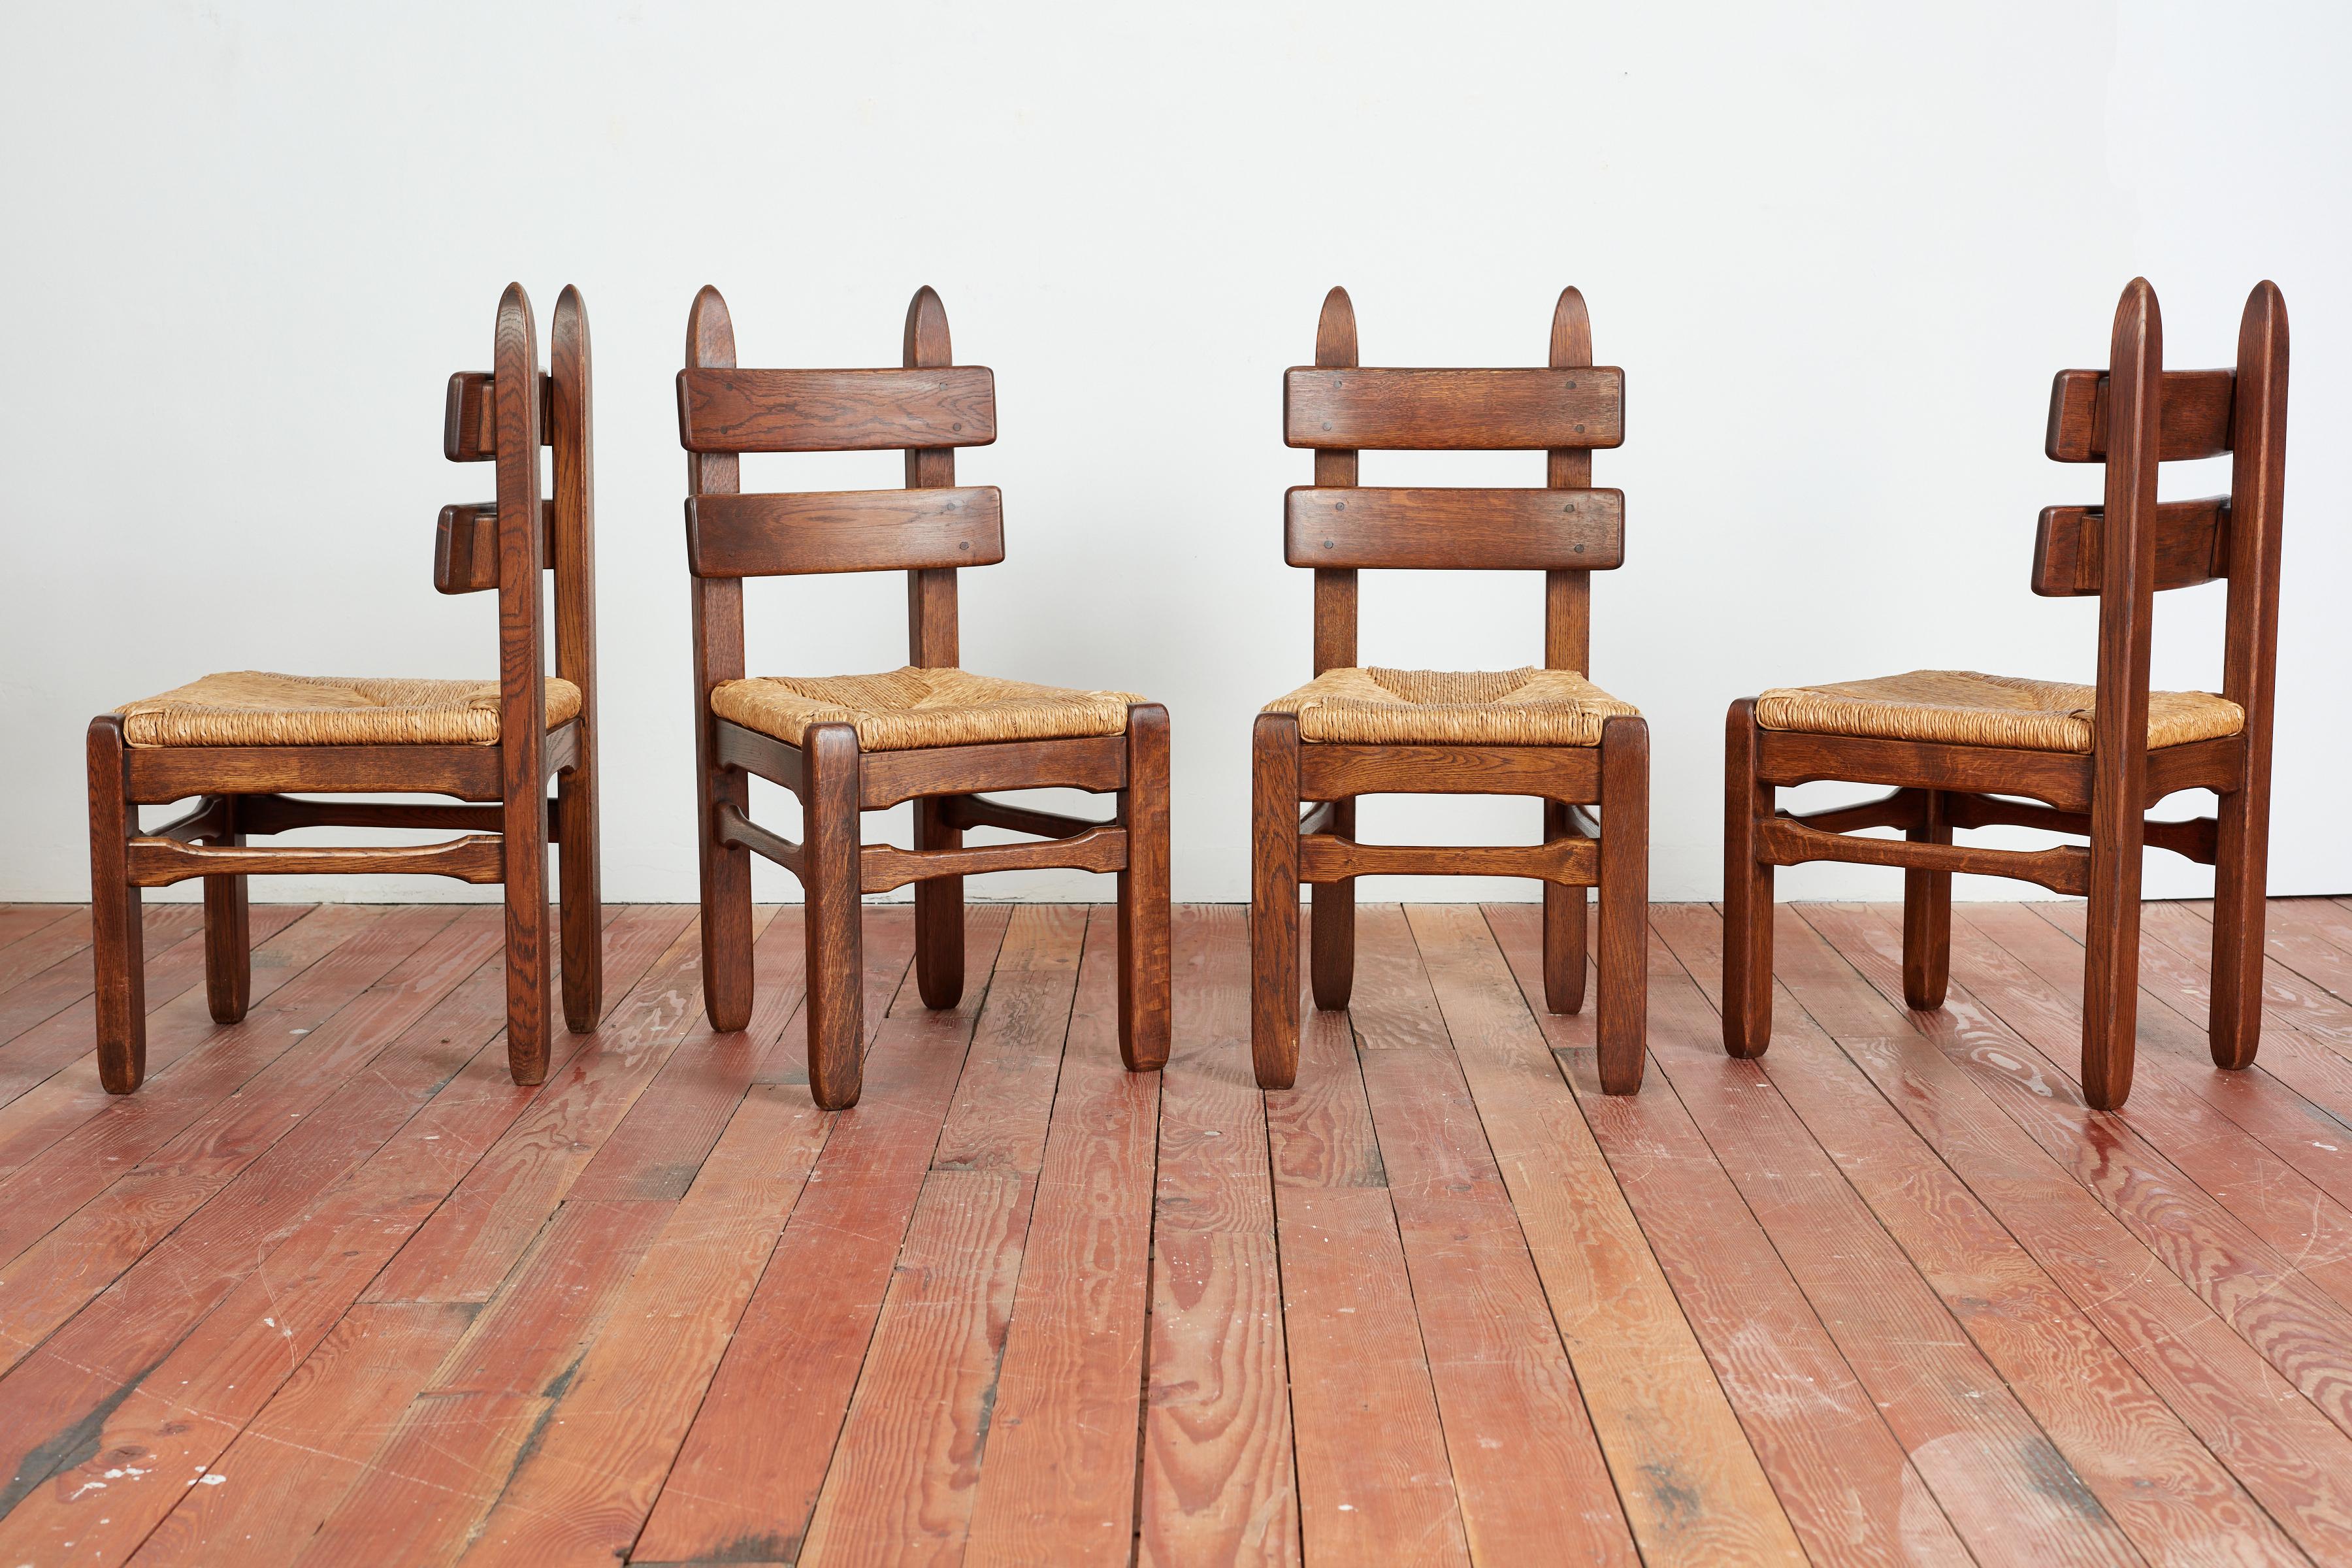 Set of 6 dining chairs by Charles Dudouyt
France, 1940s 
Wonderful sculptural ladder backs with 